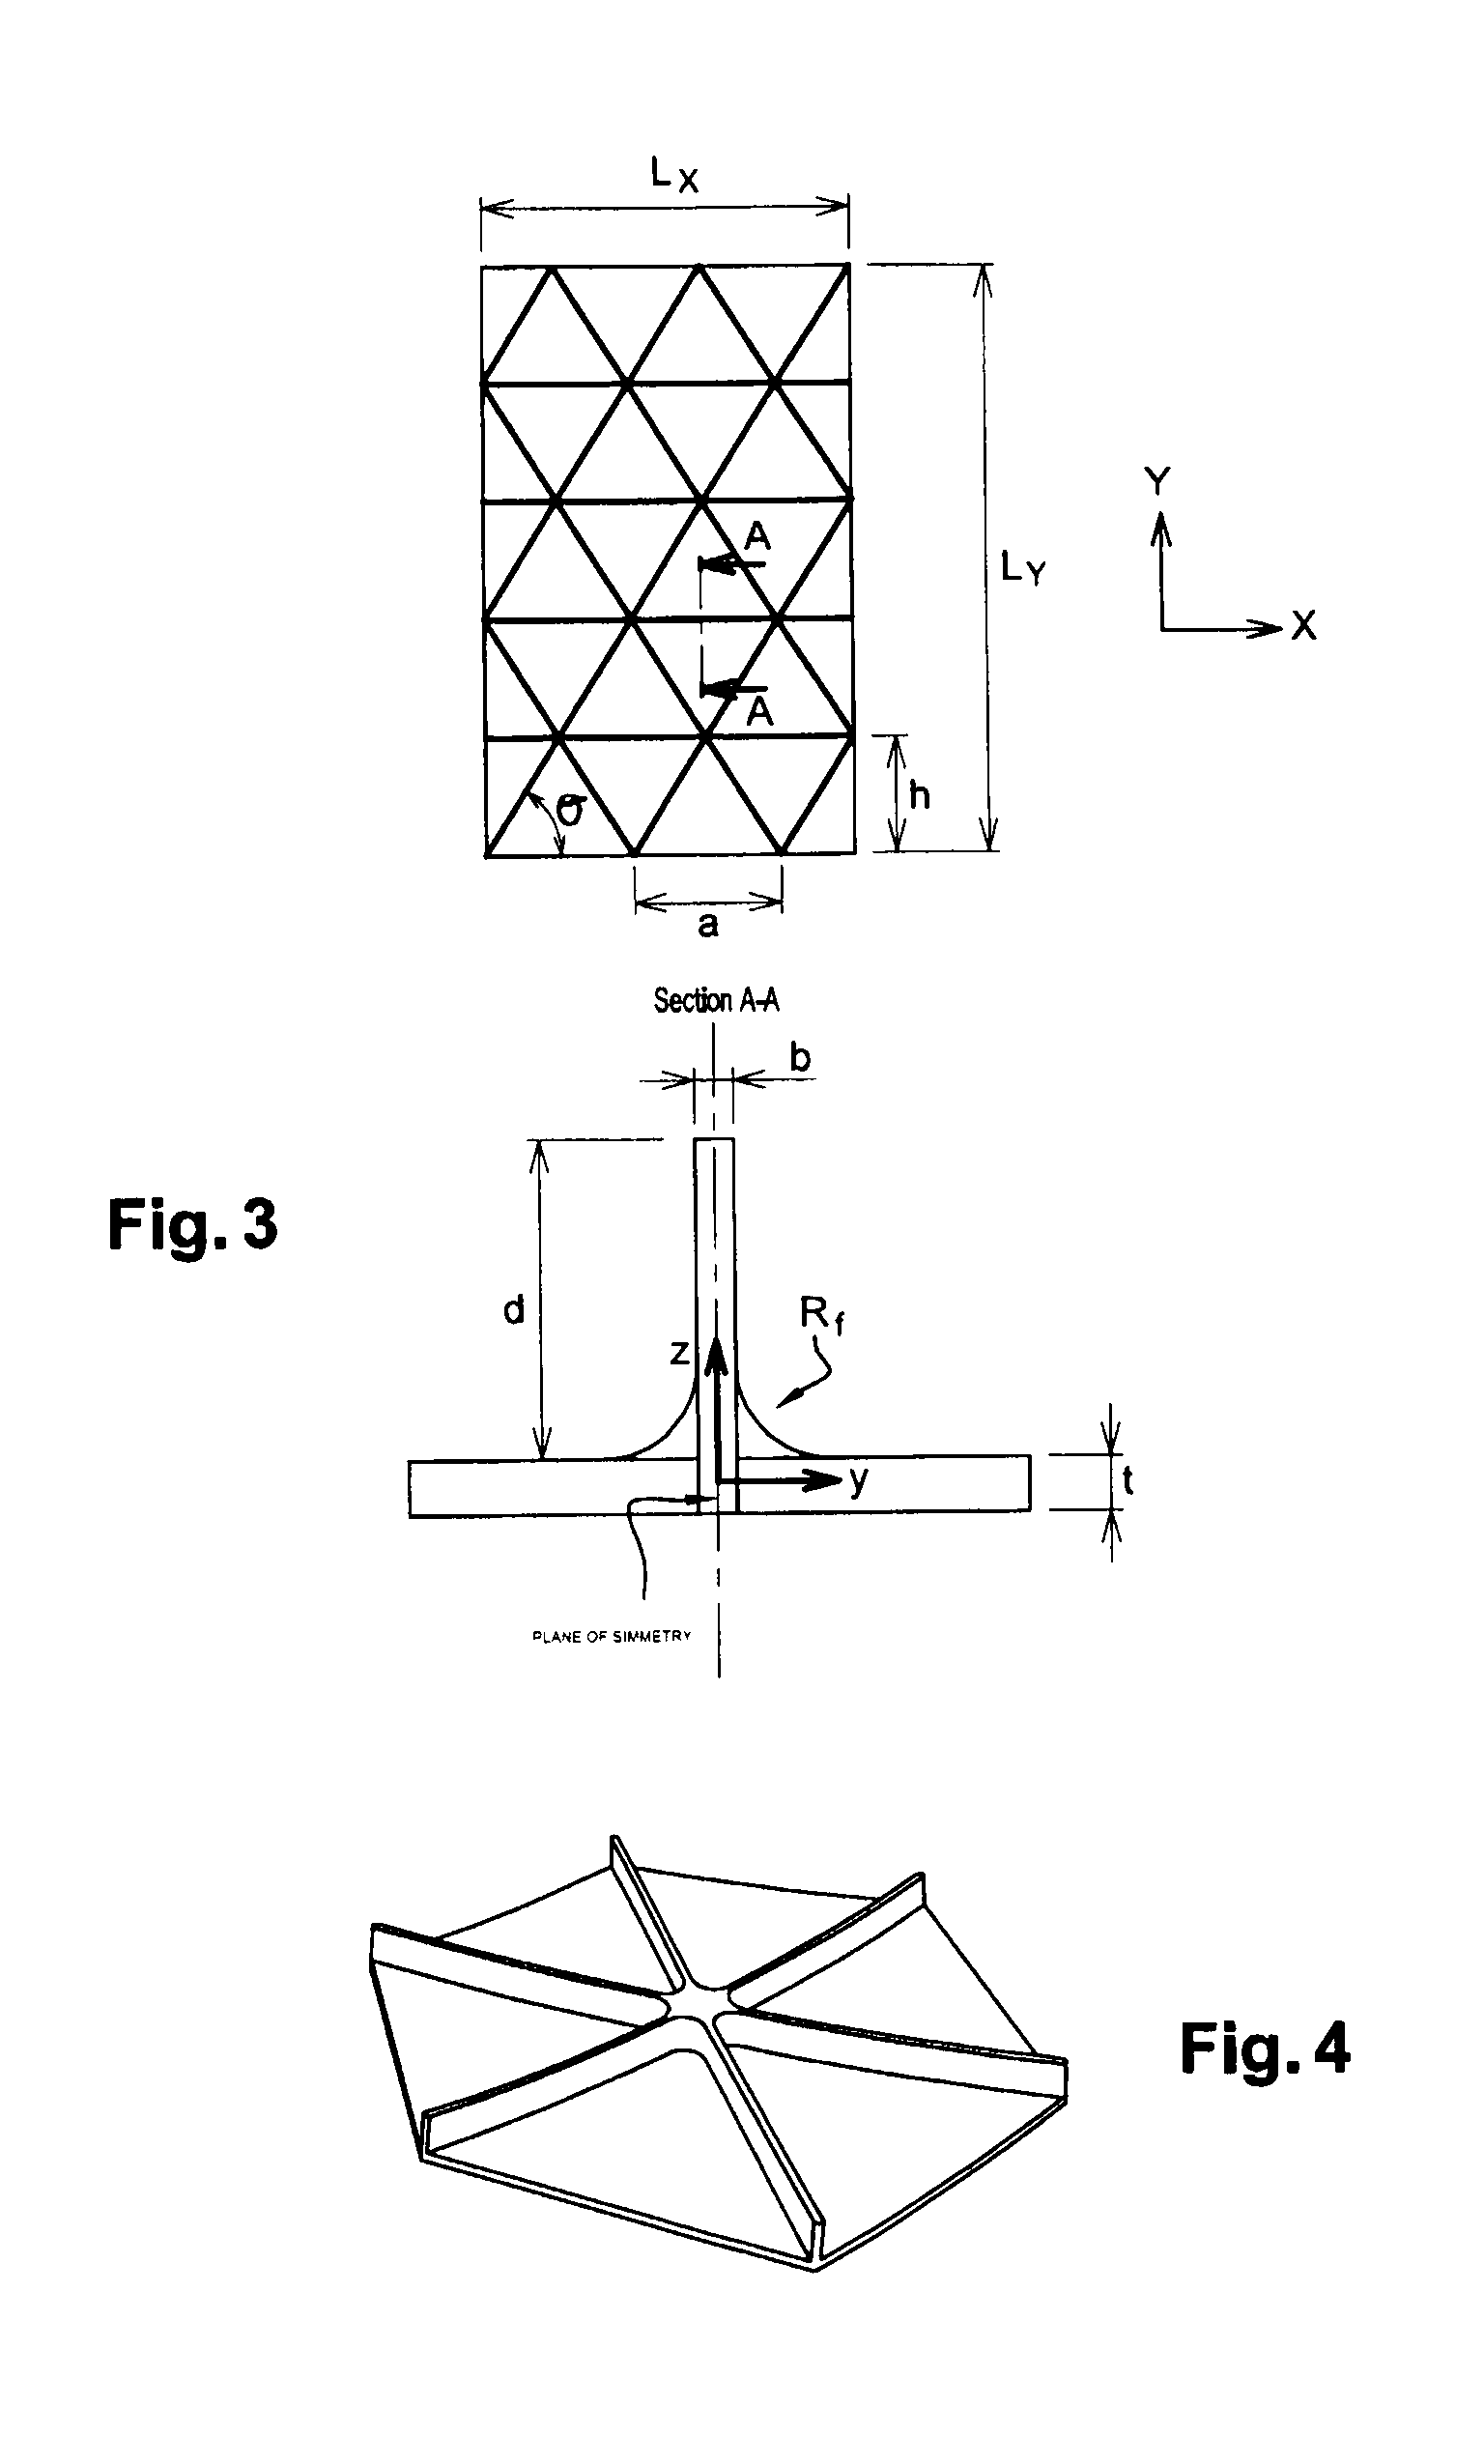 Method for the structural analysis of panels consisting of an isotropic material and stiffened by triangular pockets